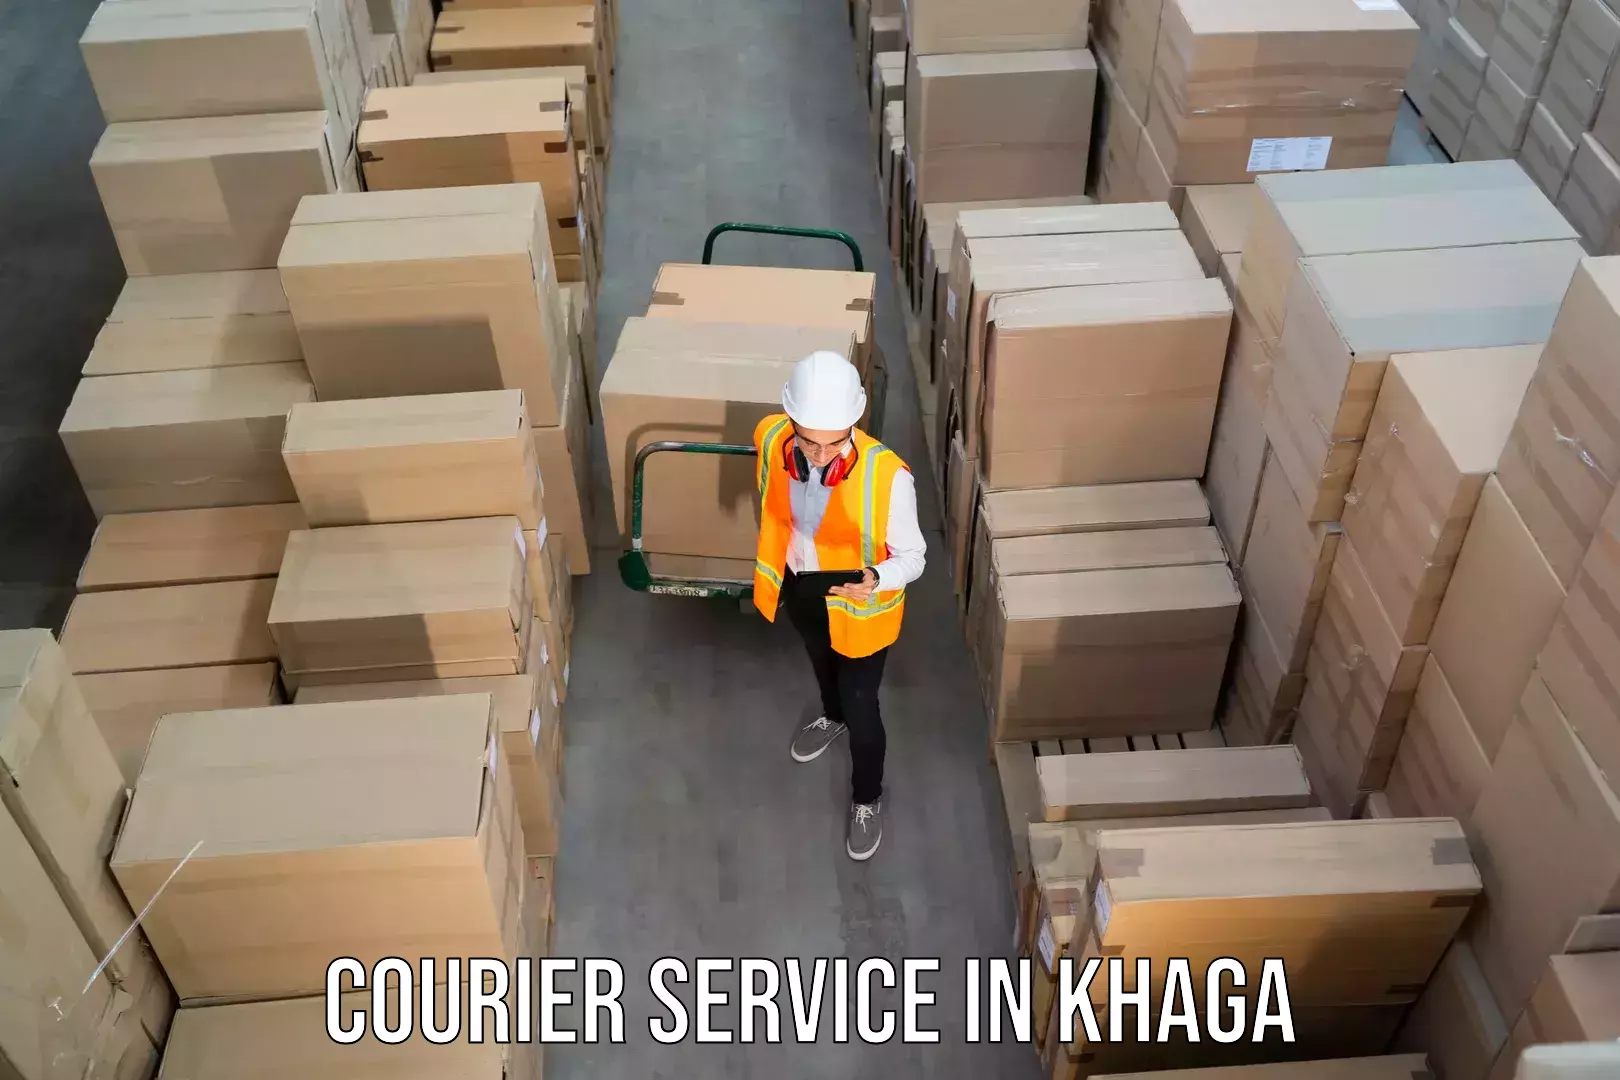 Sustainable courier practices in Khaga